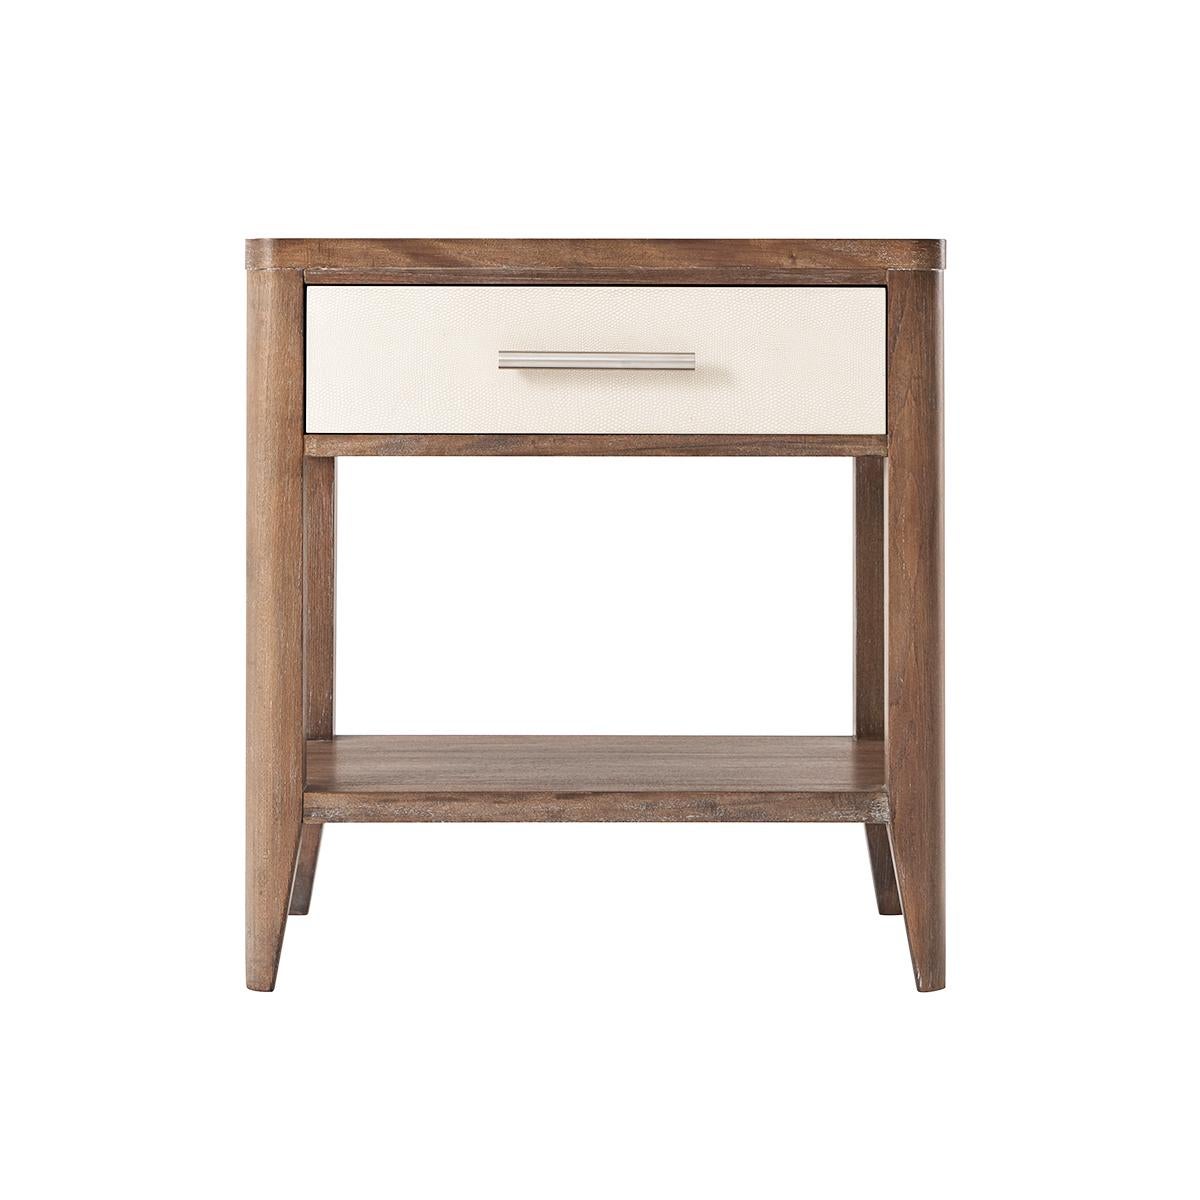 In the mangrove finish with Komodo embossed leather sides. The rectangular bedside table has a soft-closing single drawer with a brushed nickel handle, curbed corners and a lower shelf stretcher base.

Dimensions: 23.5